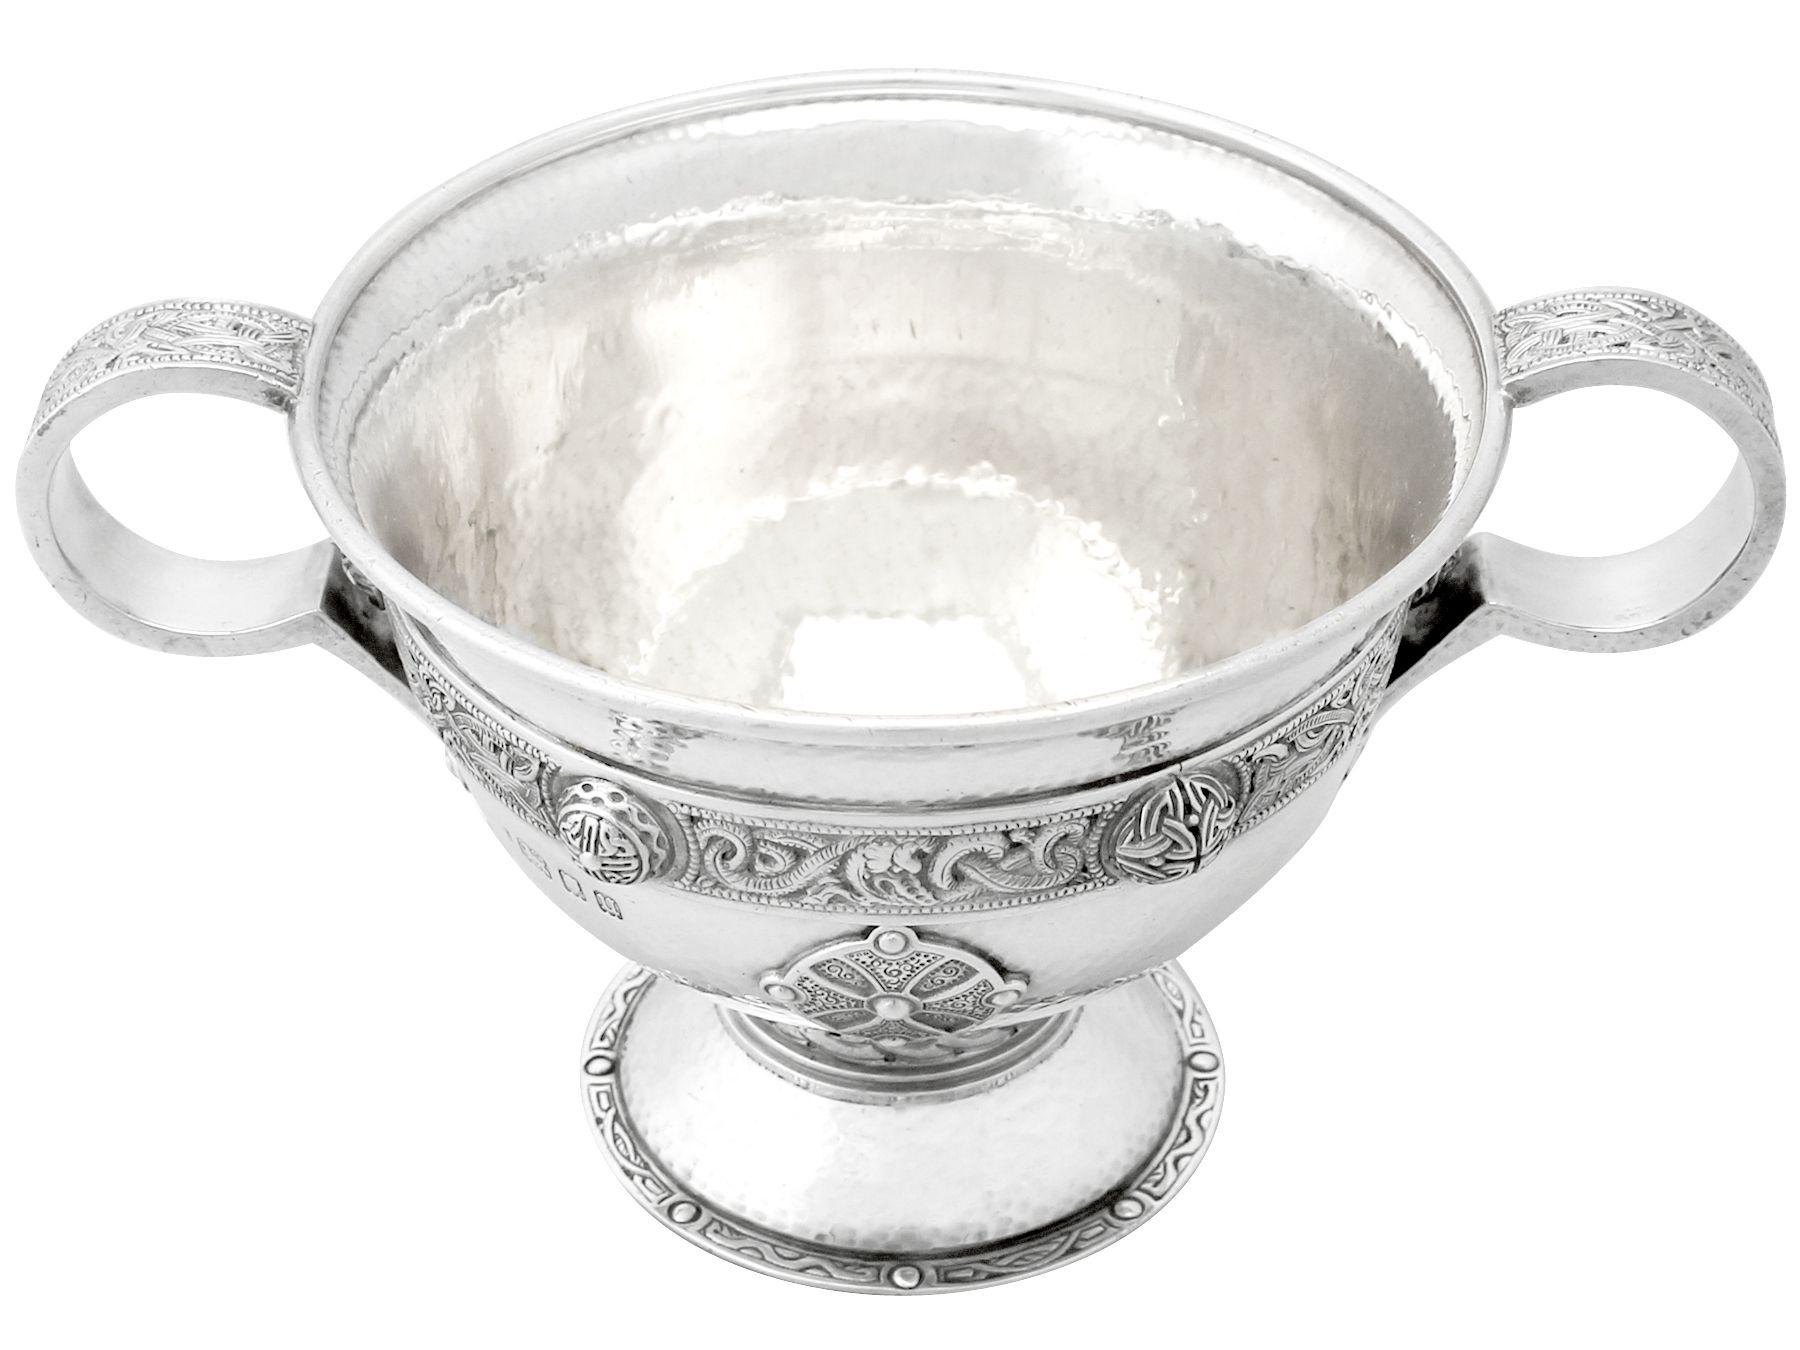 An exceptional, fine and impressive, antique George V English sterling silver bon bon/sugar bowl made by Asprey & Co Ltd in the Lindisfarne style; part of our ornamental silverware collection.

This exceptional antique George V sterling silver